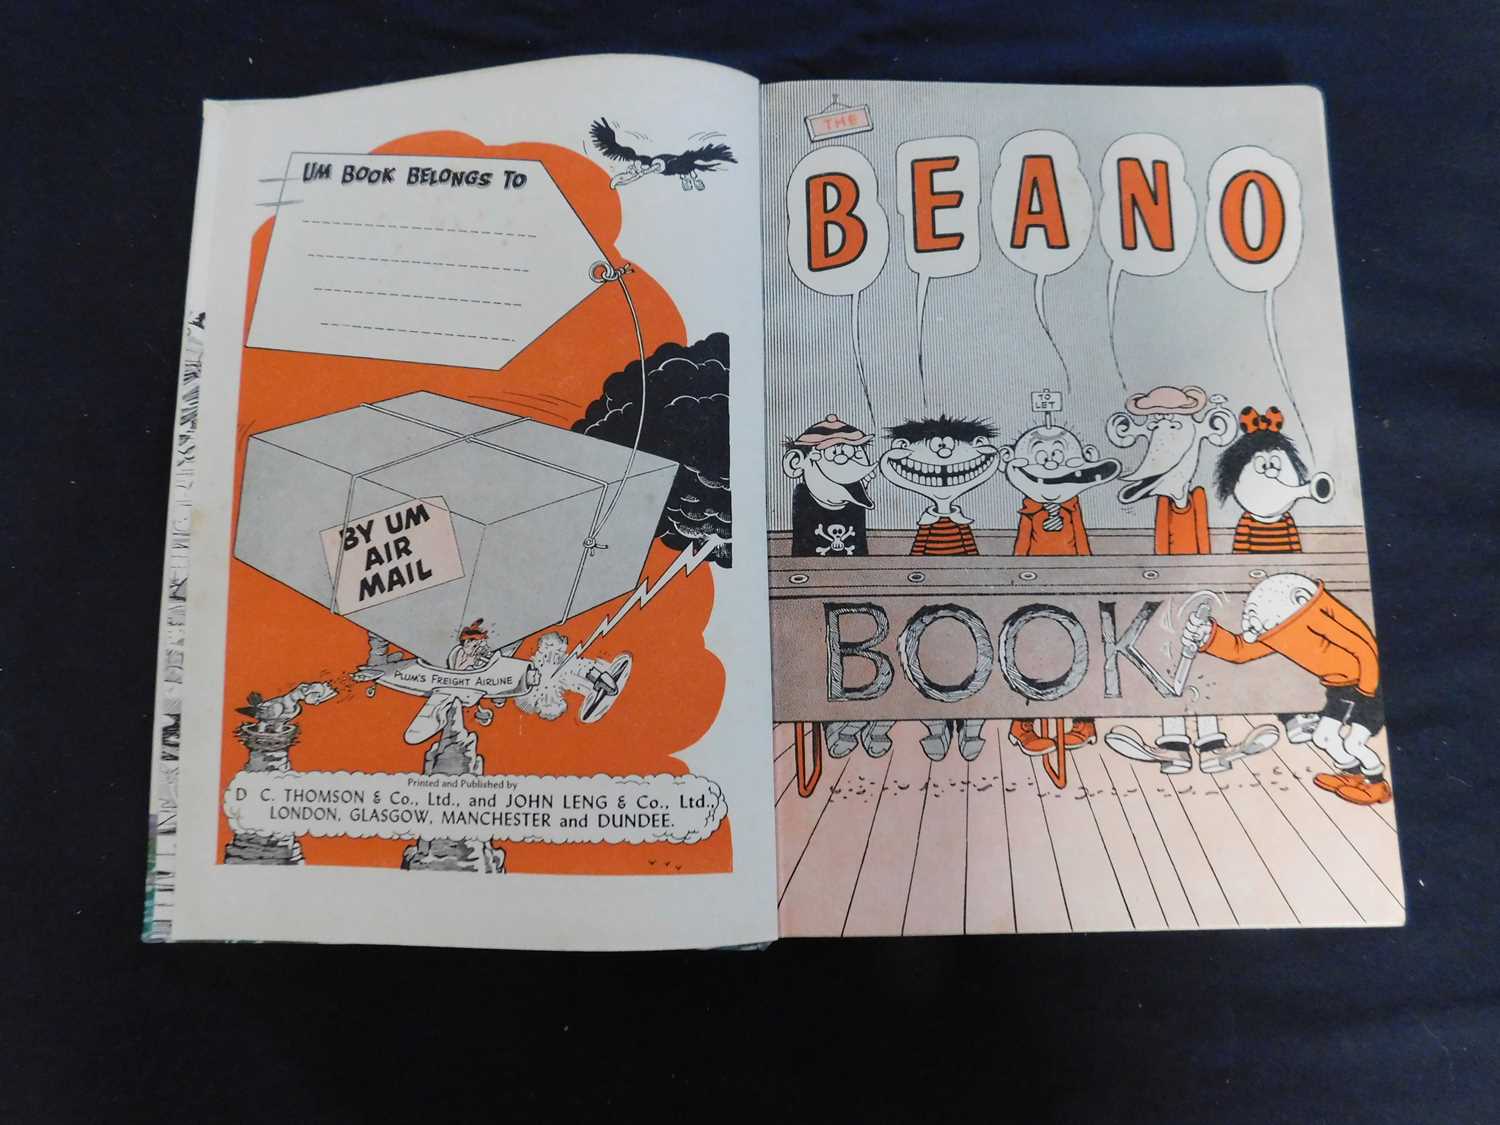 THE BEANO BOOK, [1961-62], 4to, original pictorial laminated boards, both very fine condition (2) - Image 4 of 5